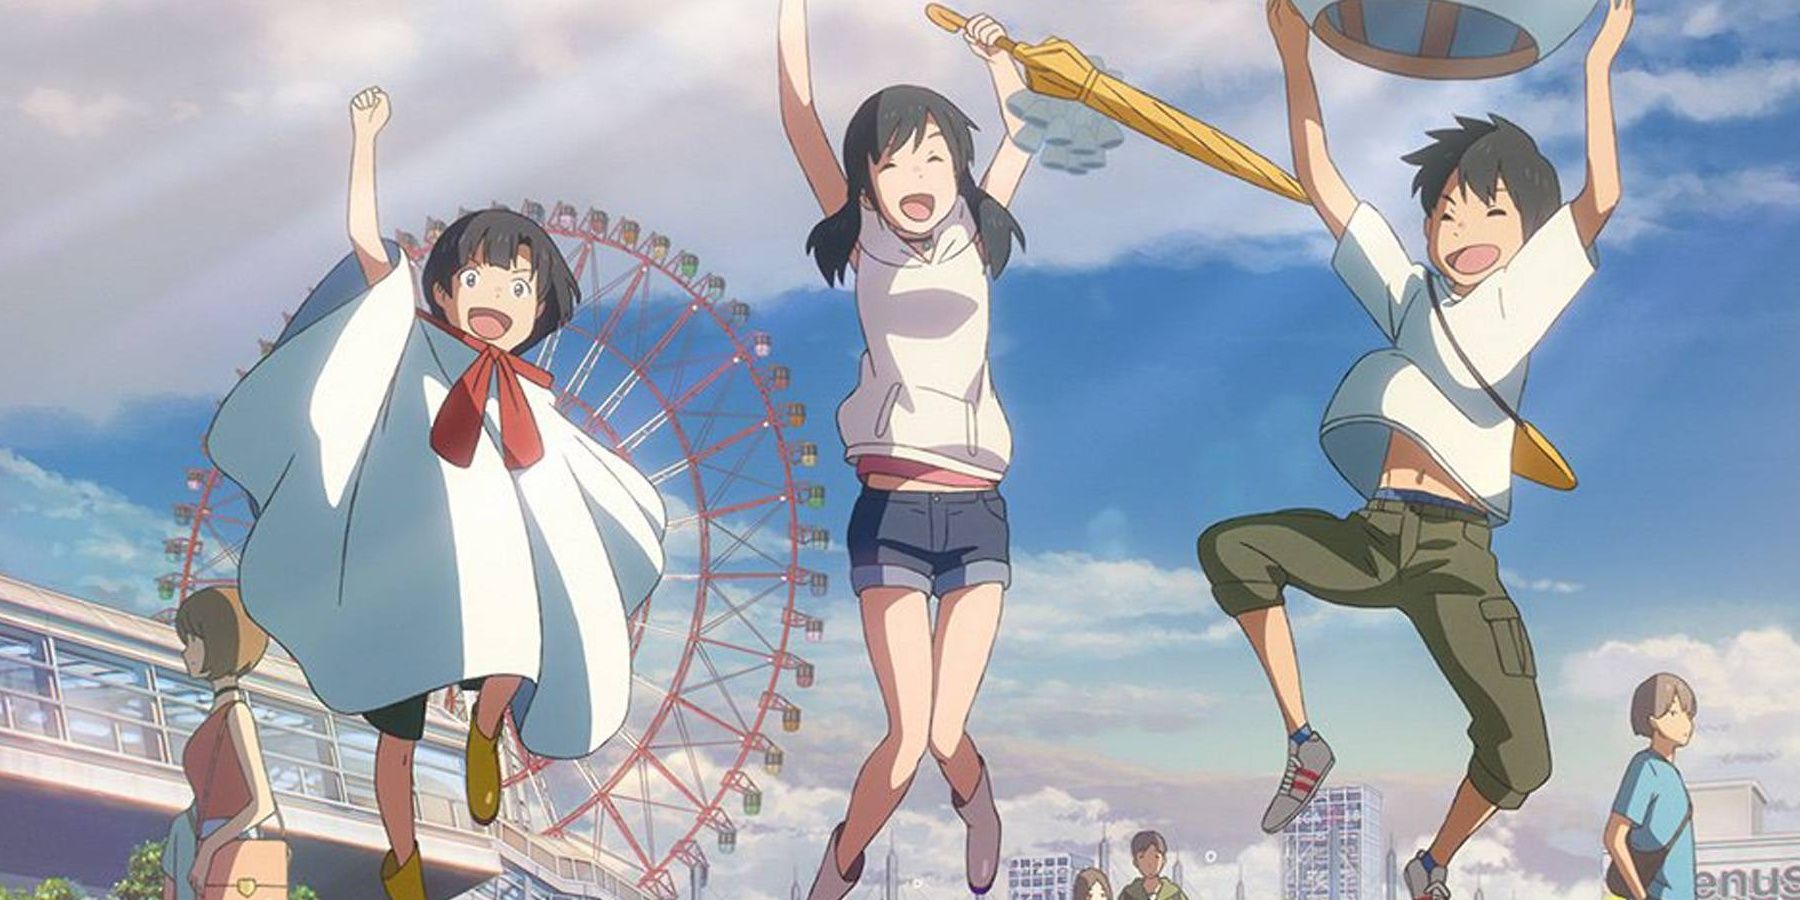 New Trailer For The Japanese Hit Anime Film WEATHERING WITH YOU  GeekTyrant